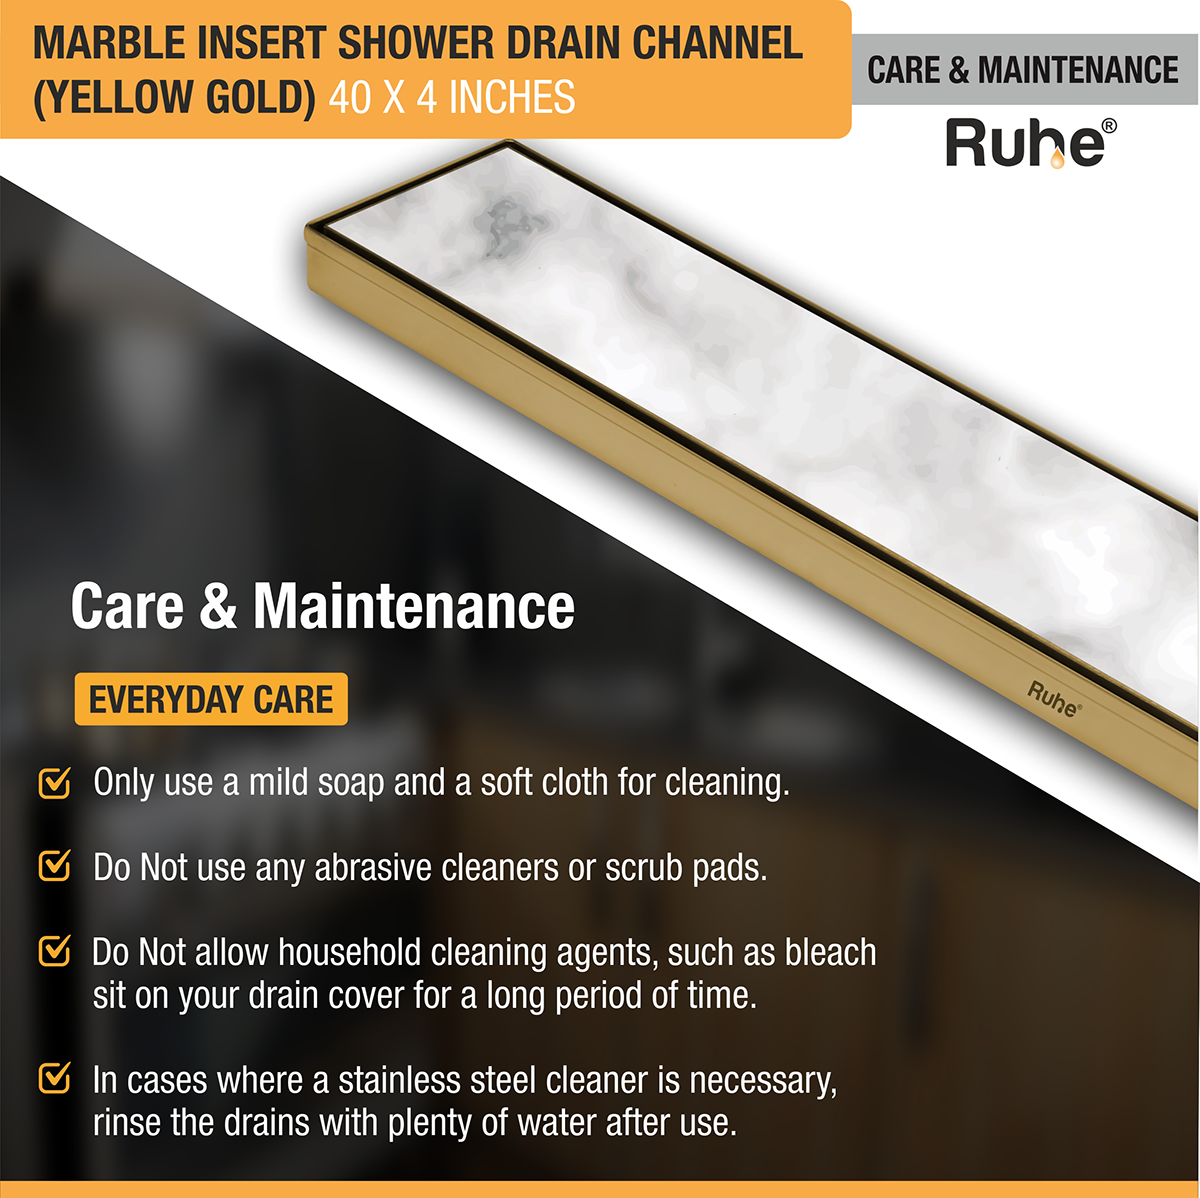 Marble Insert Shower Drain Channel (40 x 4 Inches) YELLOW GOLD PVD Coated care and maintenance